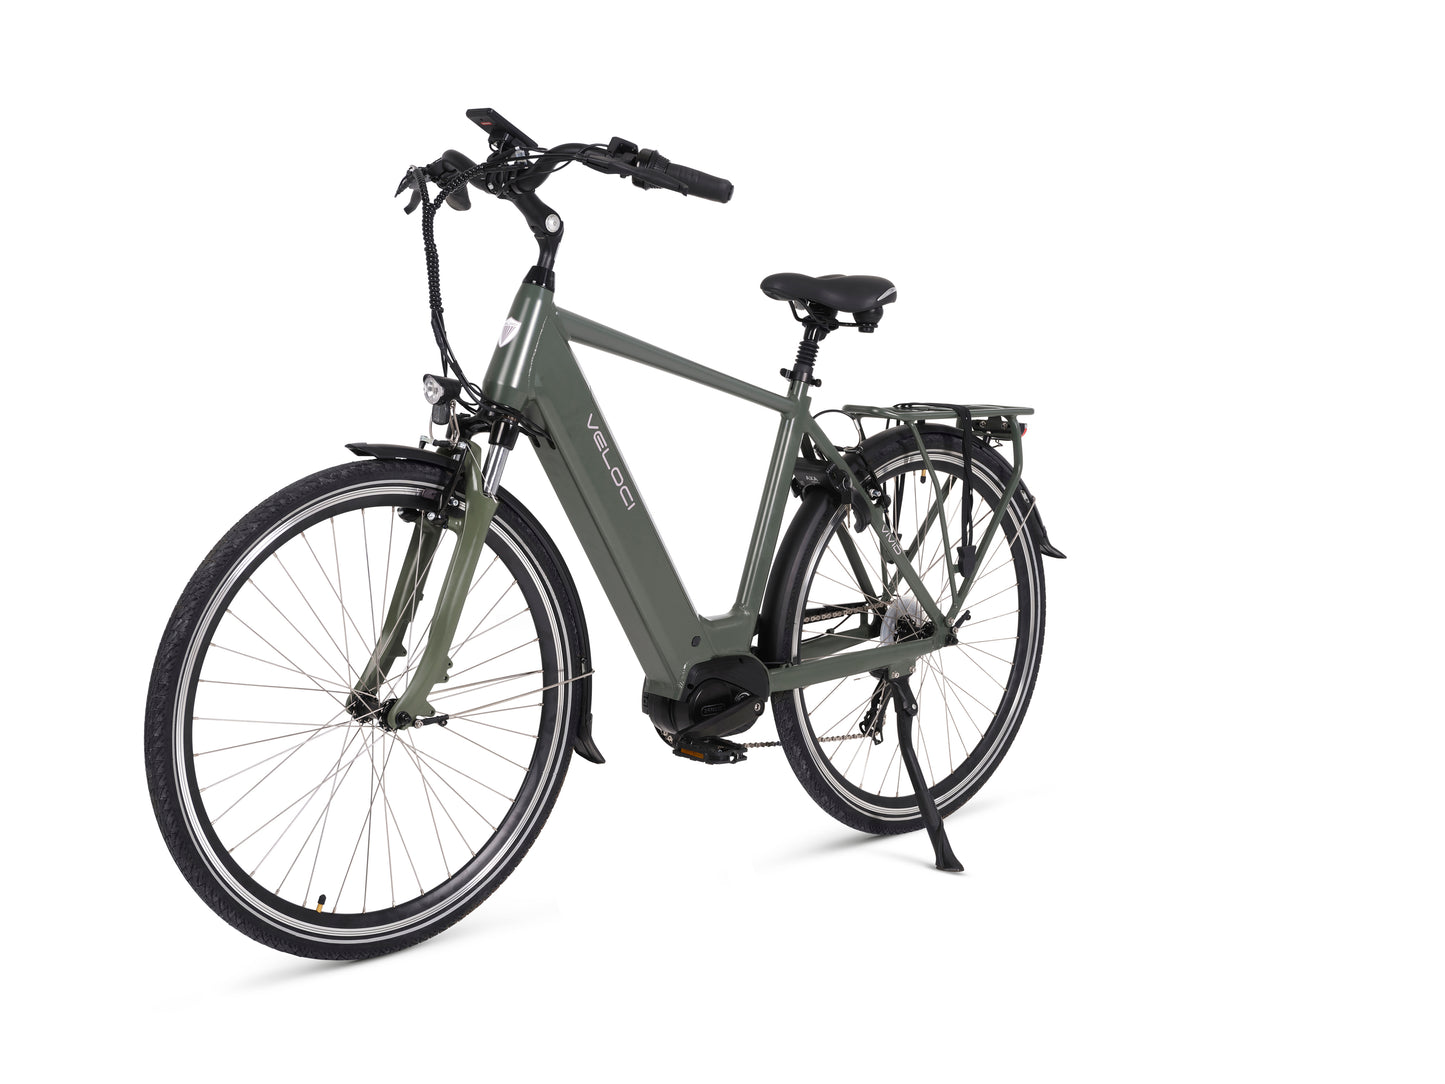 Veloci Vivid Men's electric bike available for sale. Veloci Vivid e-bike outlet e-bike.